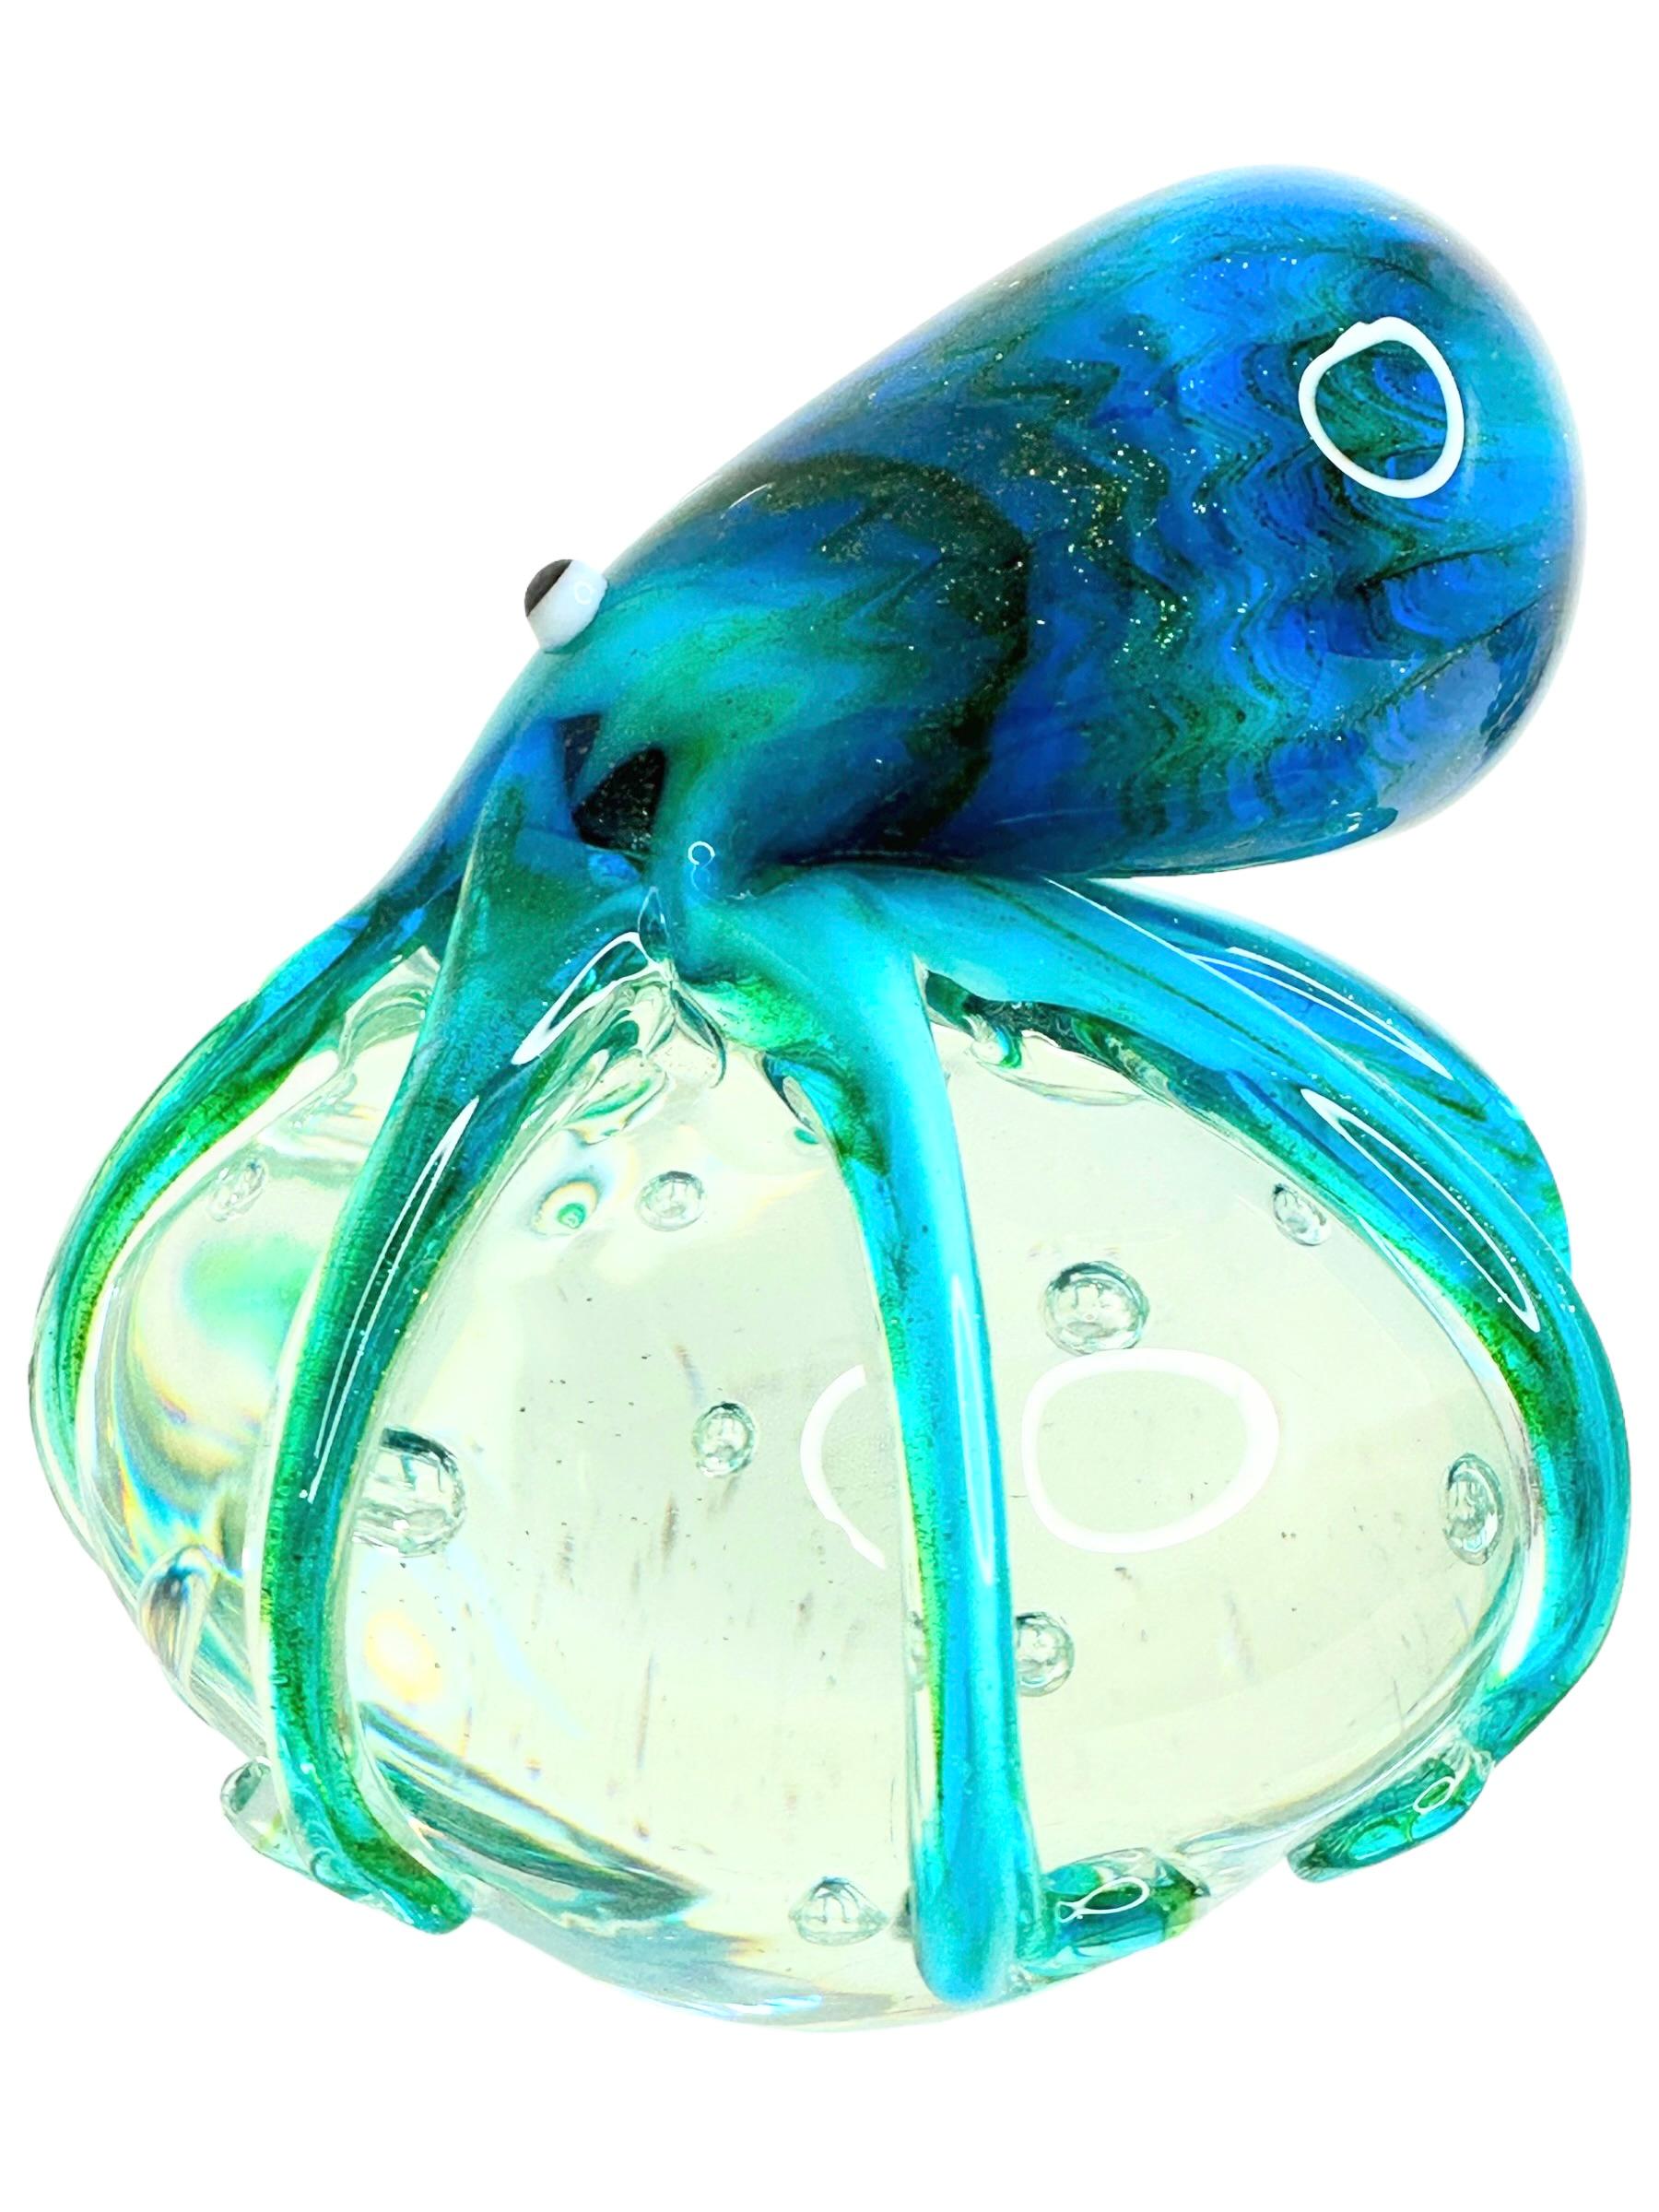 Beautiful Murano hand blown aquarium Italian art glass paper weight. Showing a giant octopus, on a glass bubble floating on controlled bubbles. Colors are different shades of blue, turquoise, white, black and clear. A beautiful nice addition to your